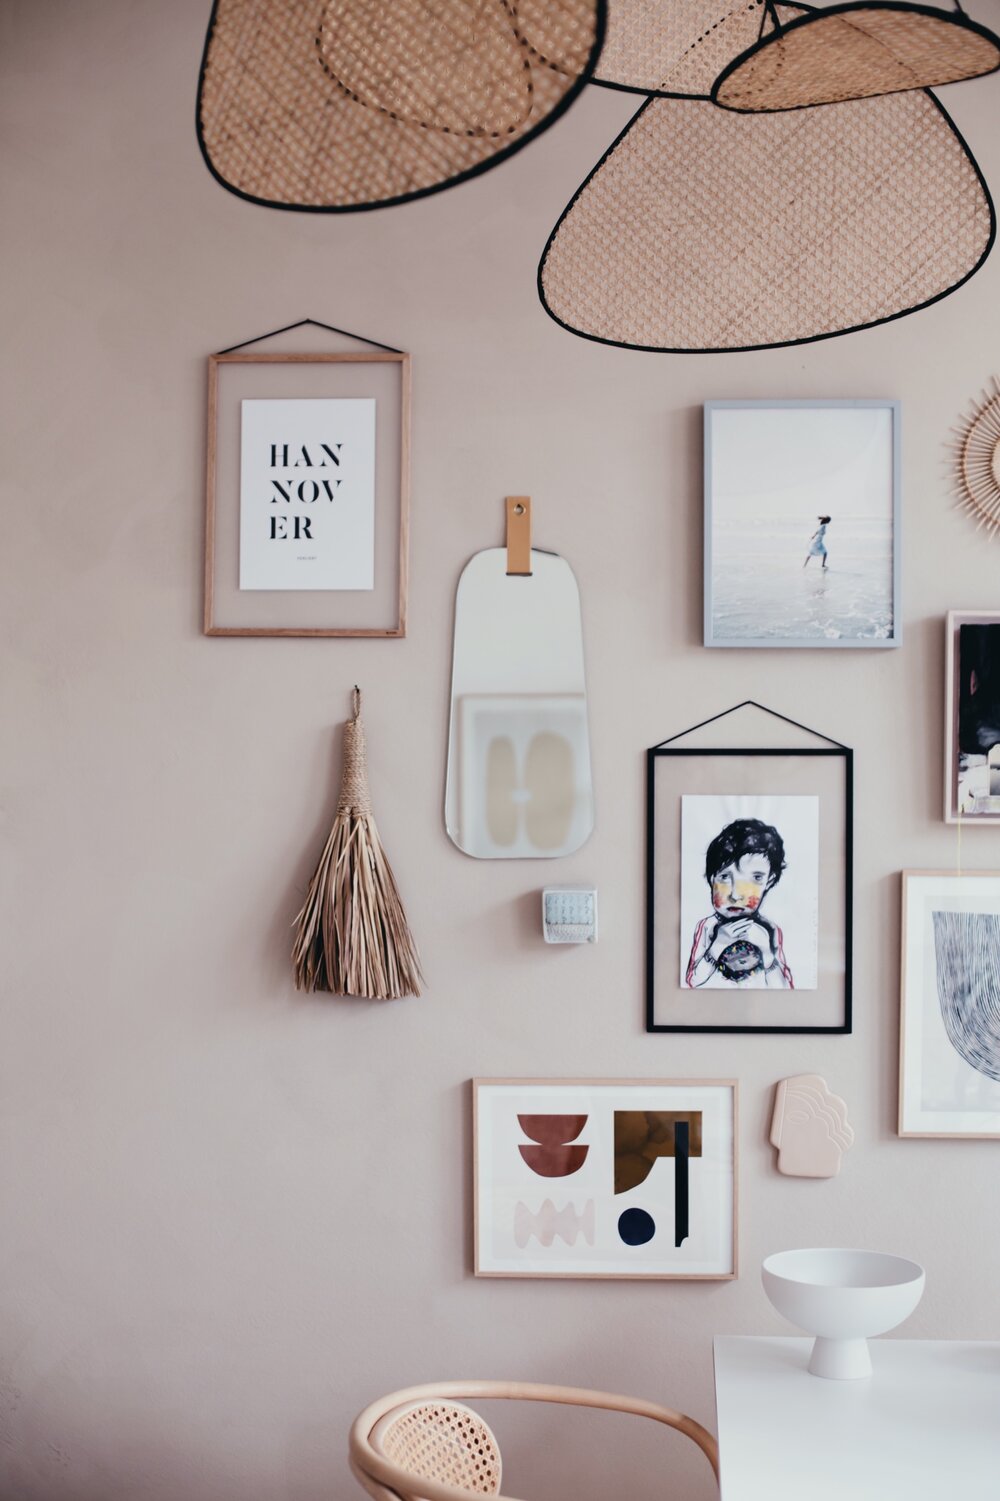 4 Ways To Select Art + Objects for a Gallery Art Wall Like Chrissy Tiegen